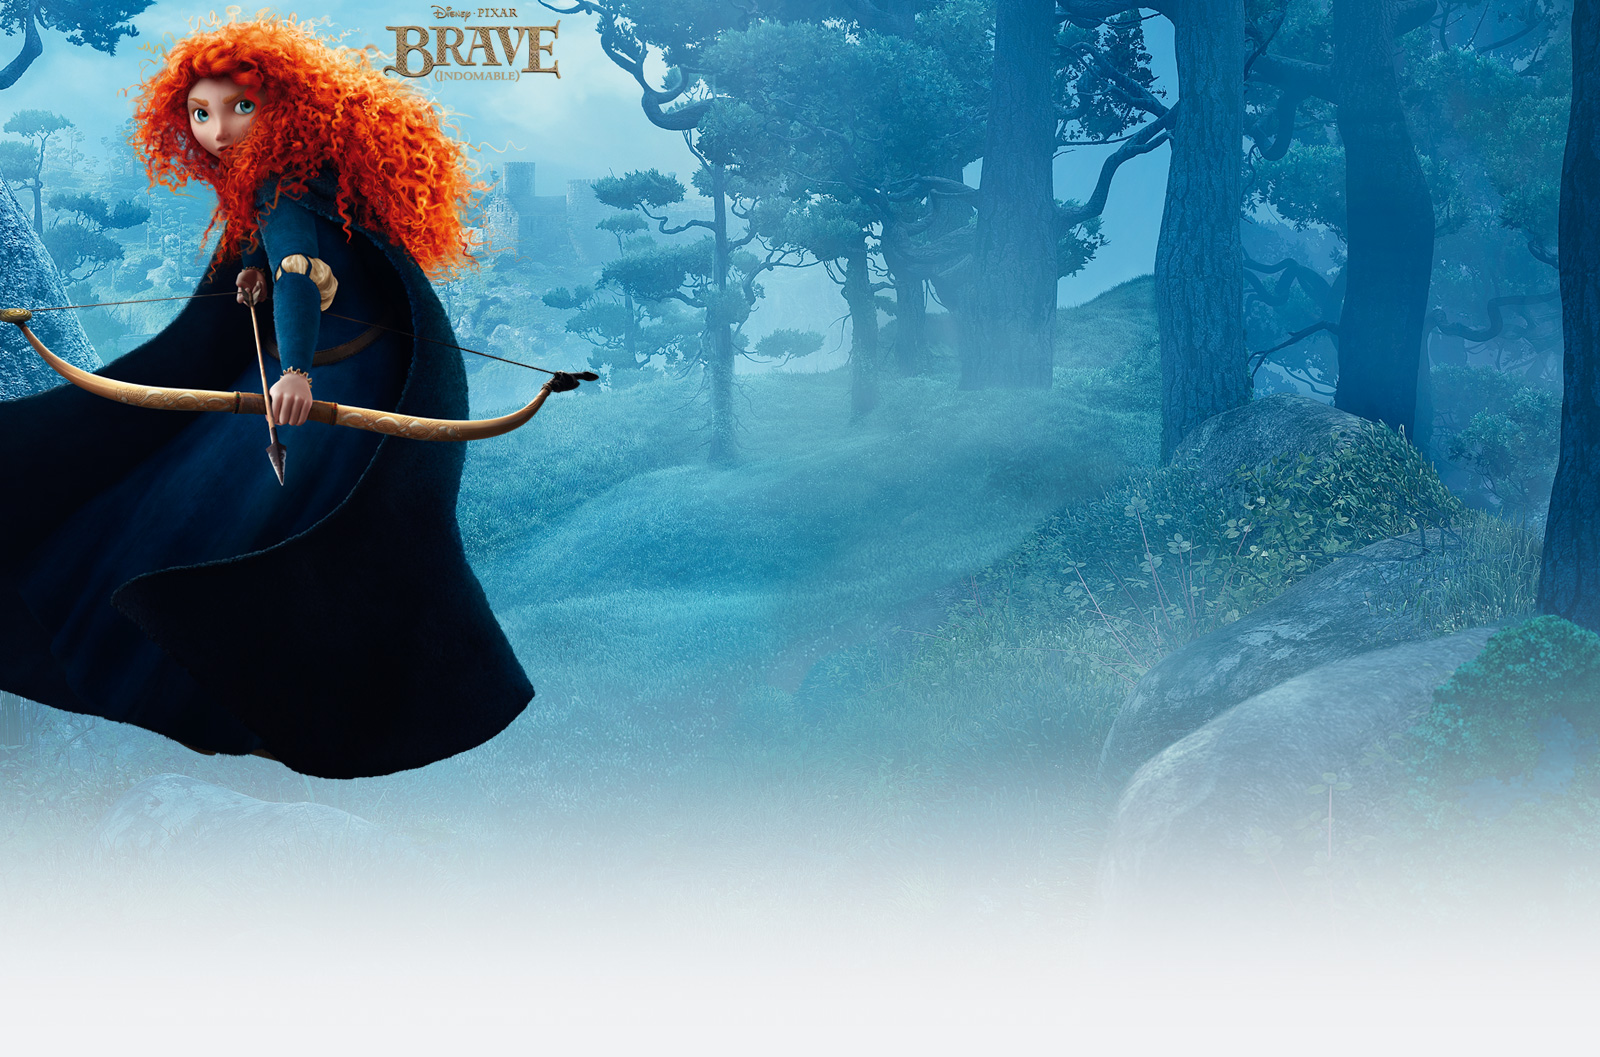 brave download for pc